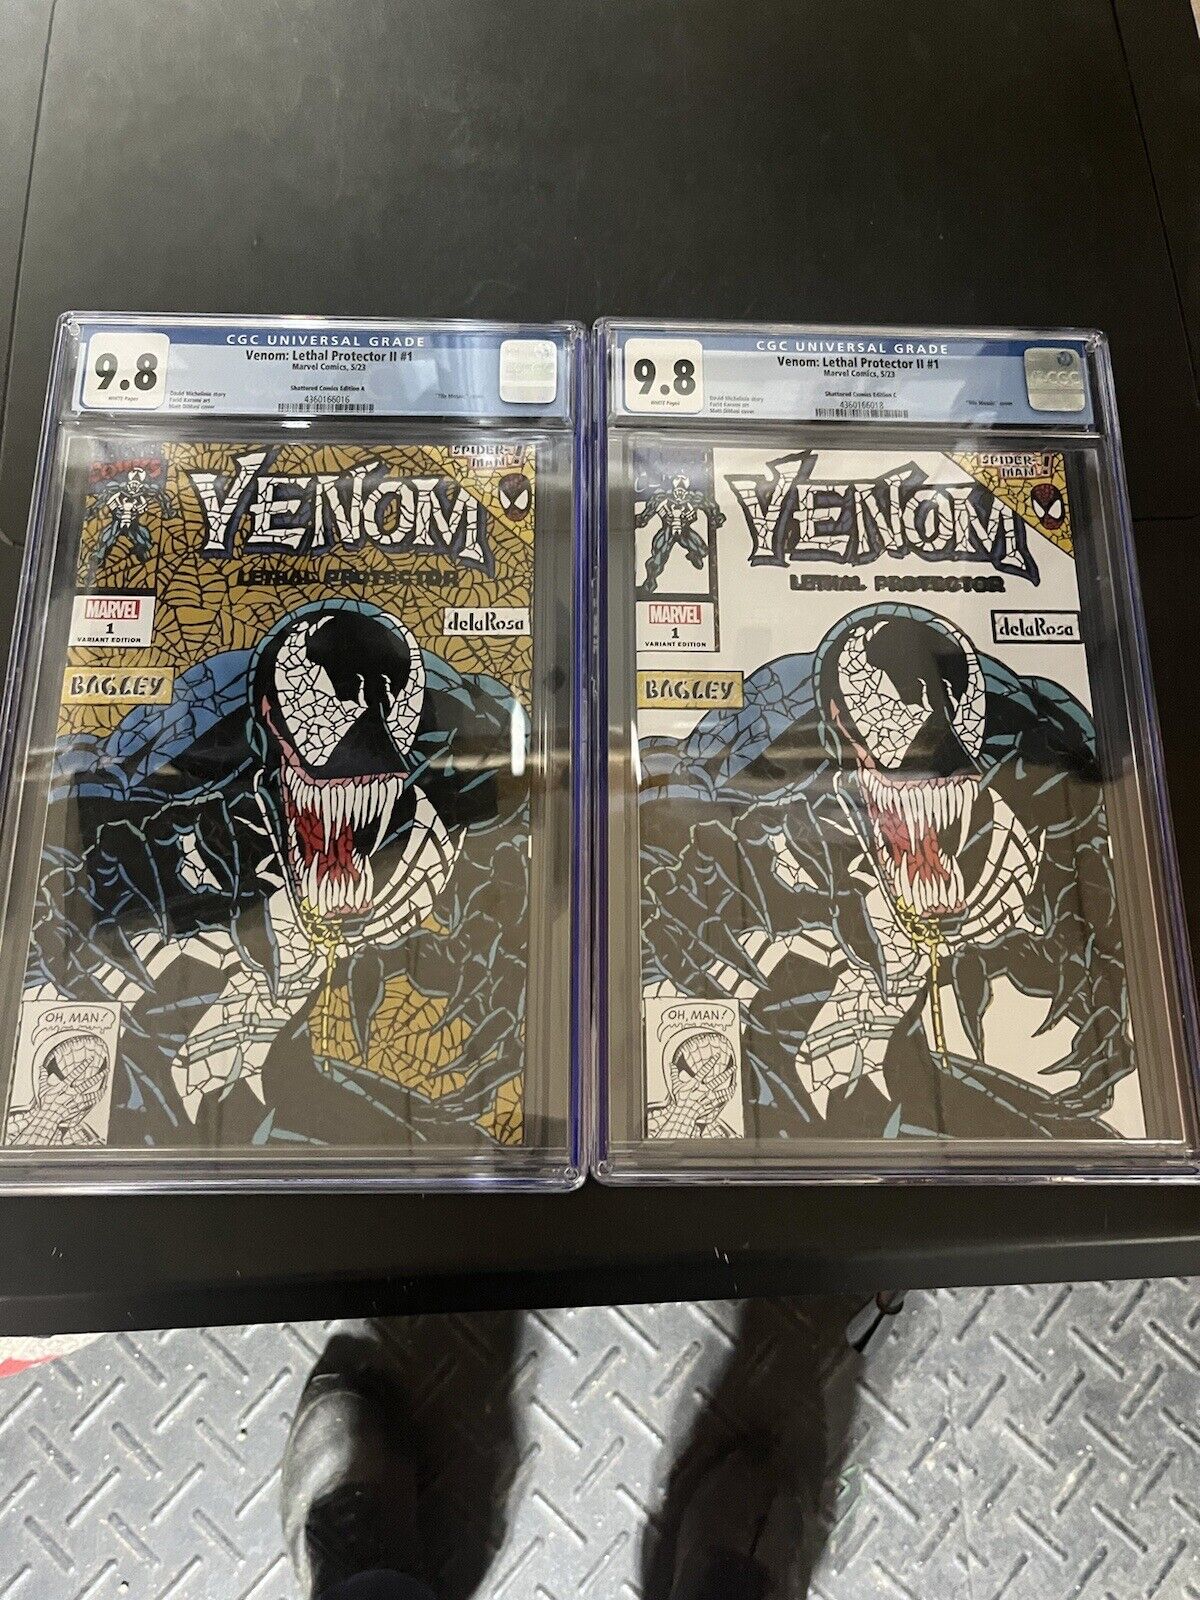 Venom Lethal Protector II, Edition A & C SHATTERED, Both Graded 9.8